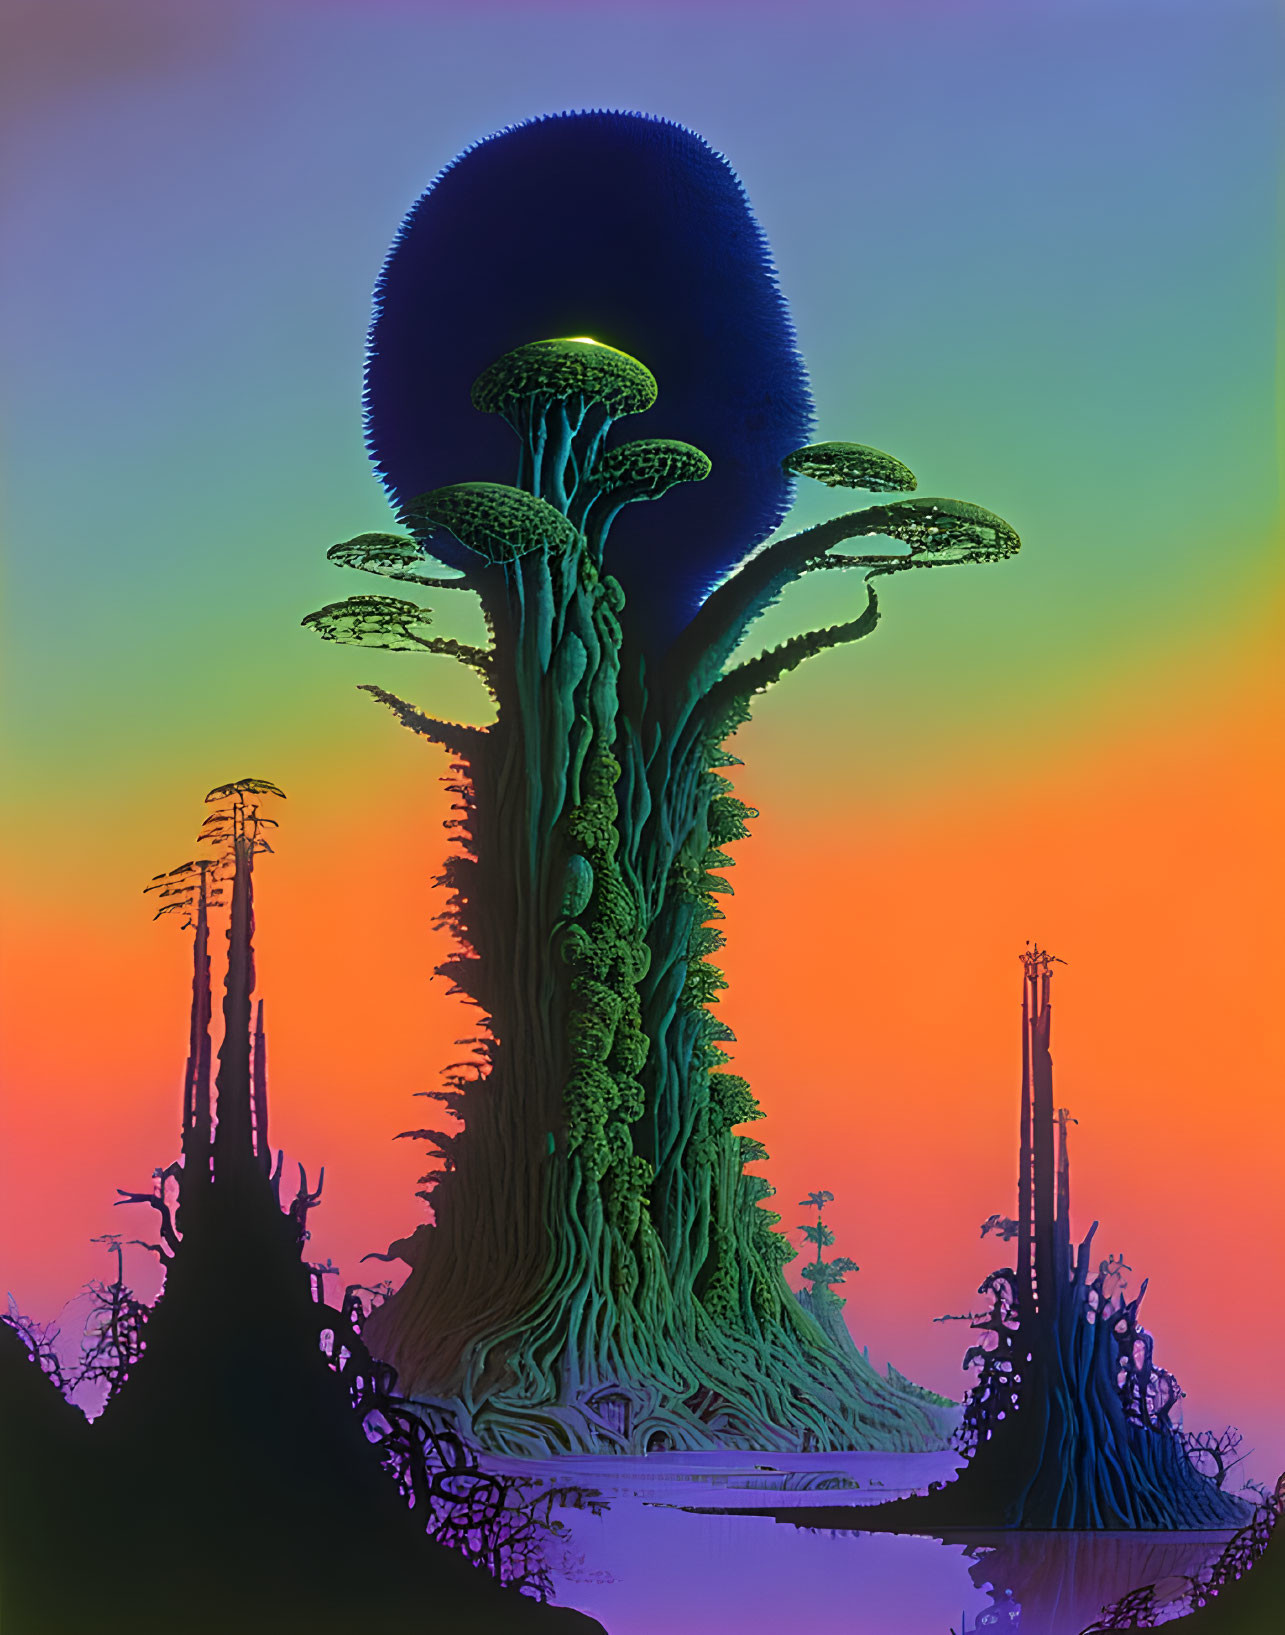 Surreal towering tree with mushroom-like canopy amidst gradient sky and vegetation